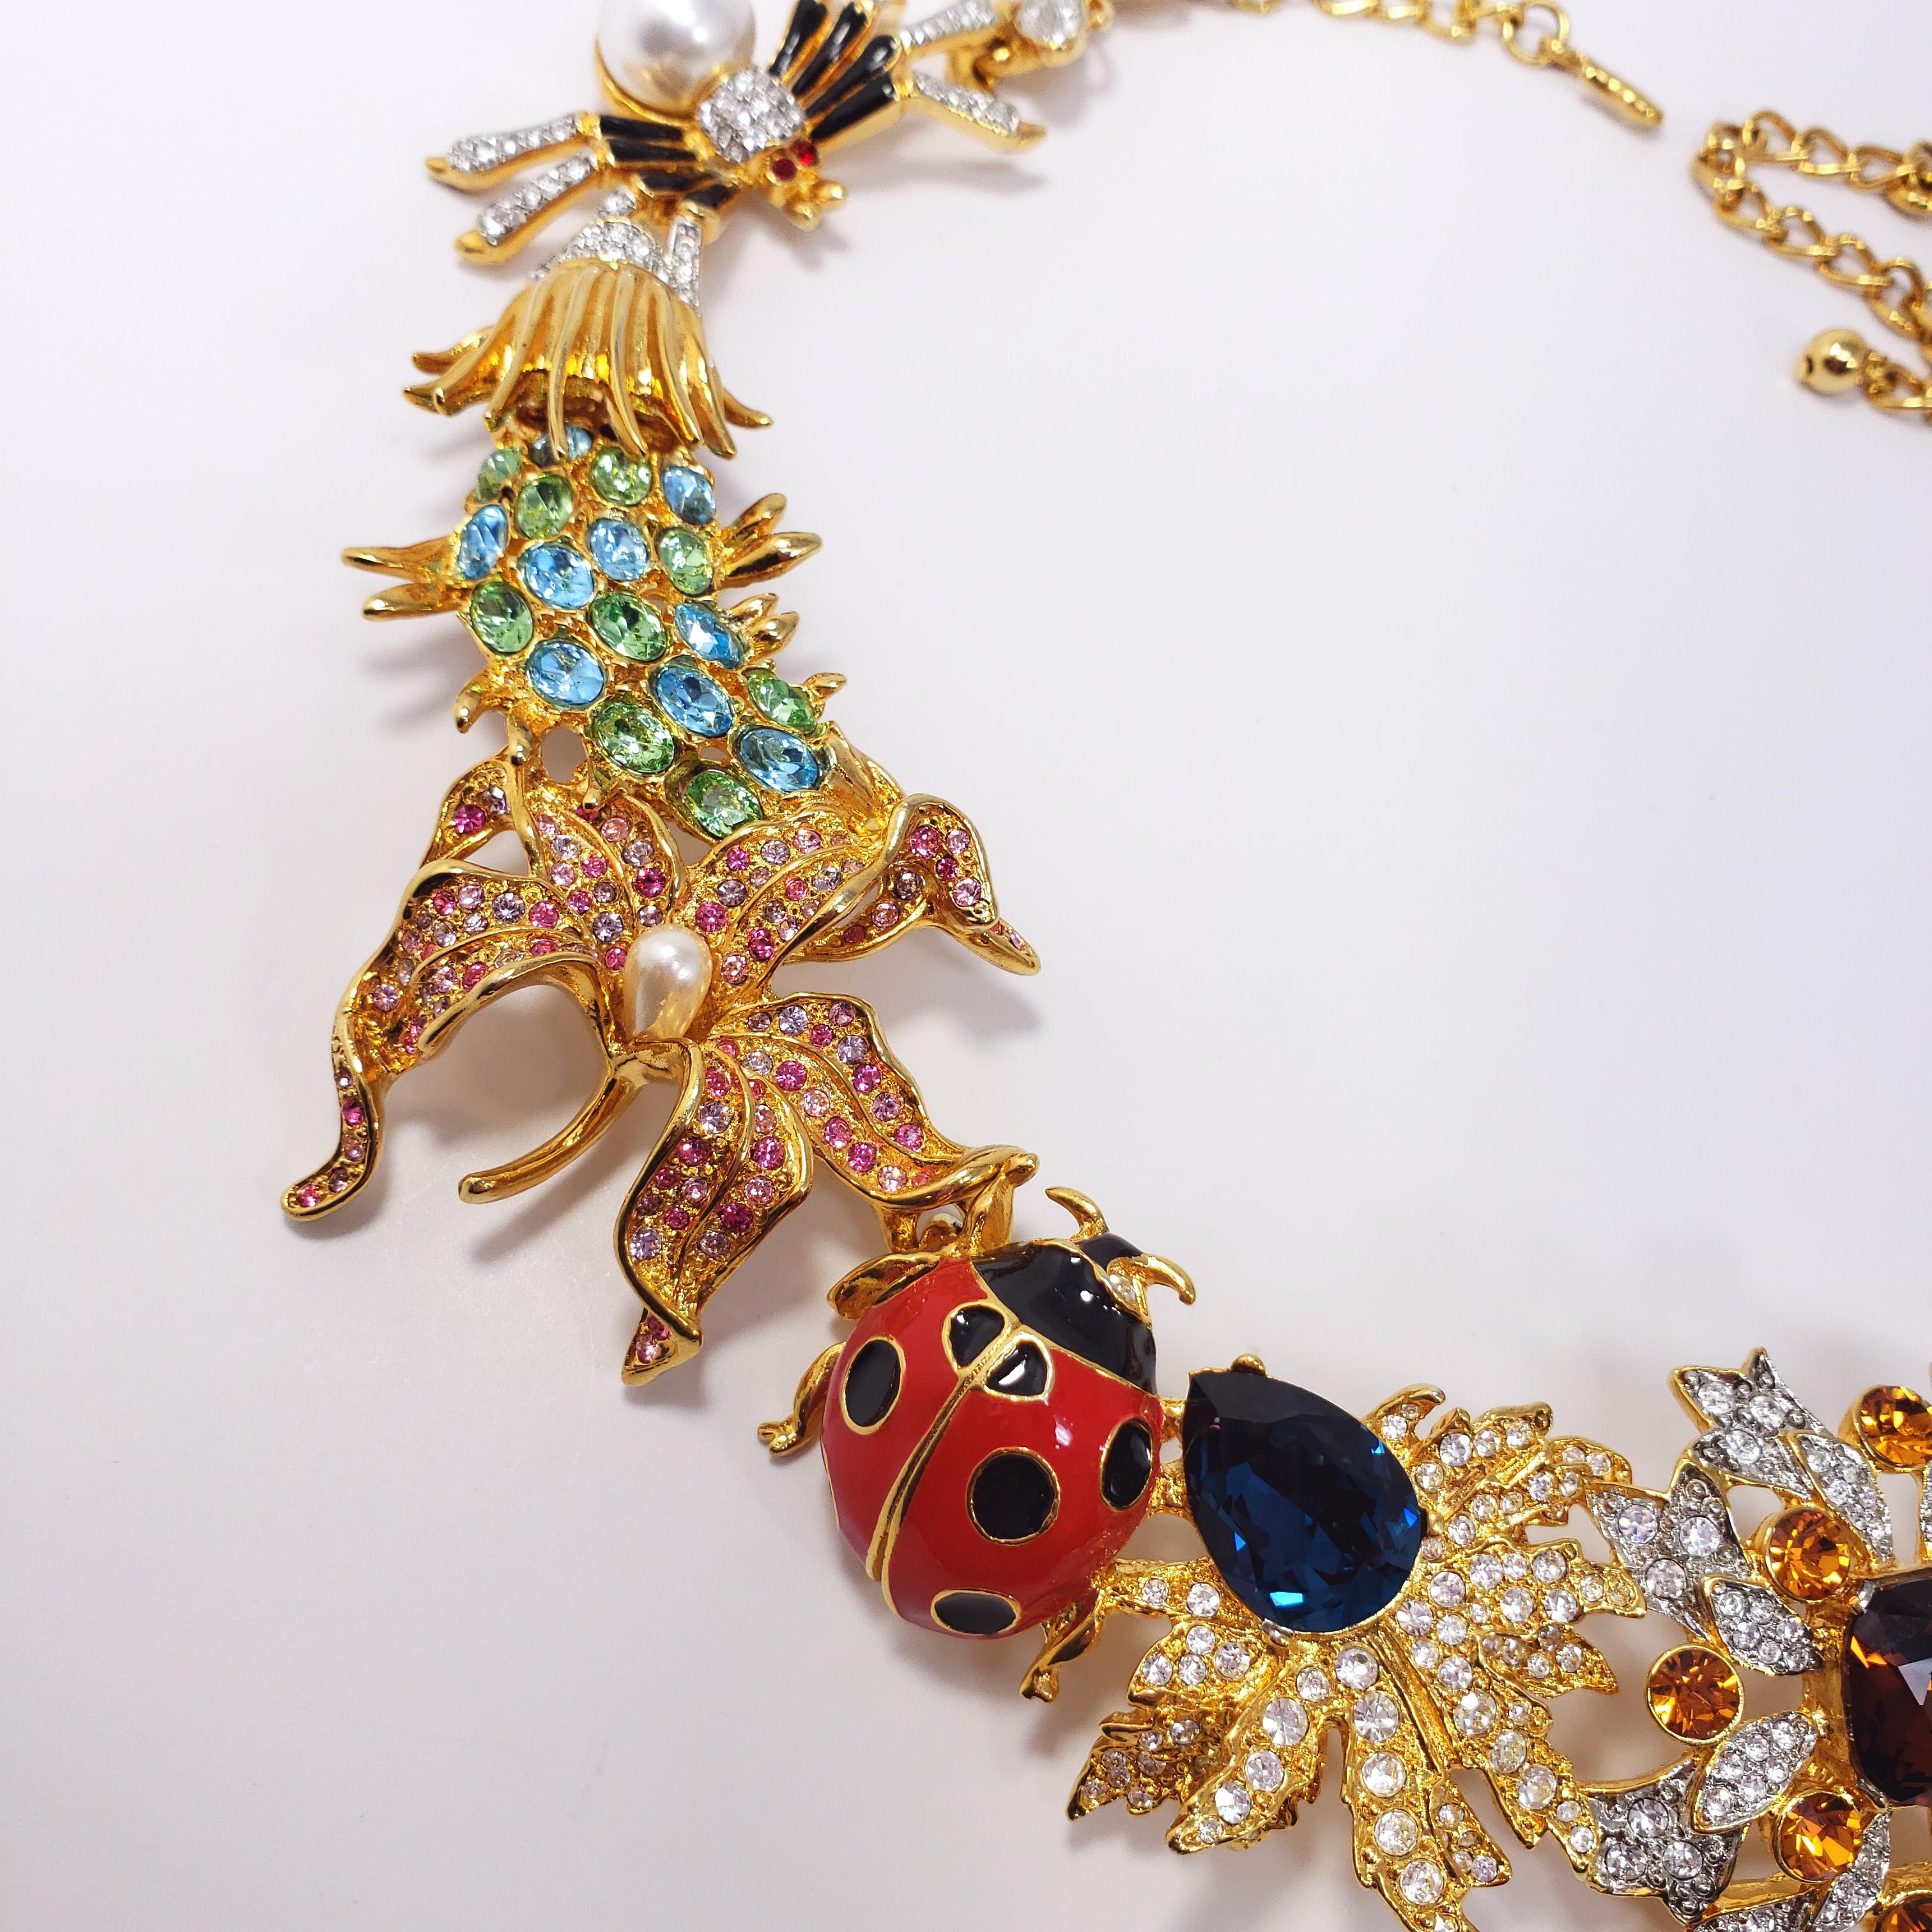 Mixed Cut Kenneth Jay Lane Ornate Colorful Crystal Kaleidoscope Collar Necklace in Gold For Sale